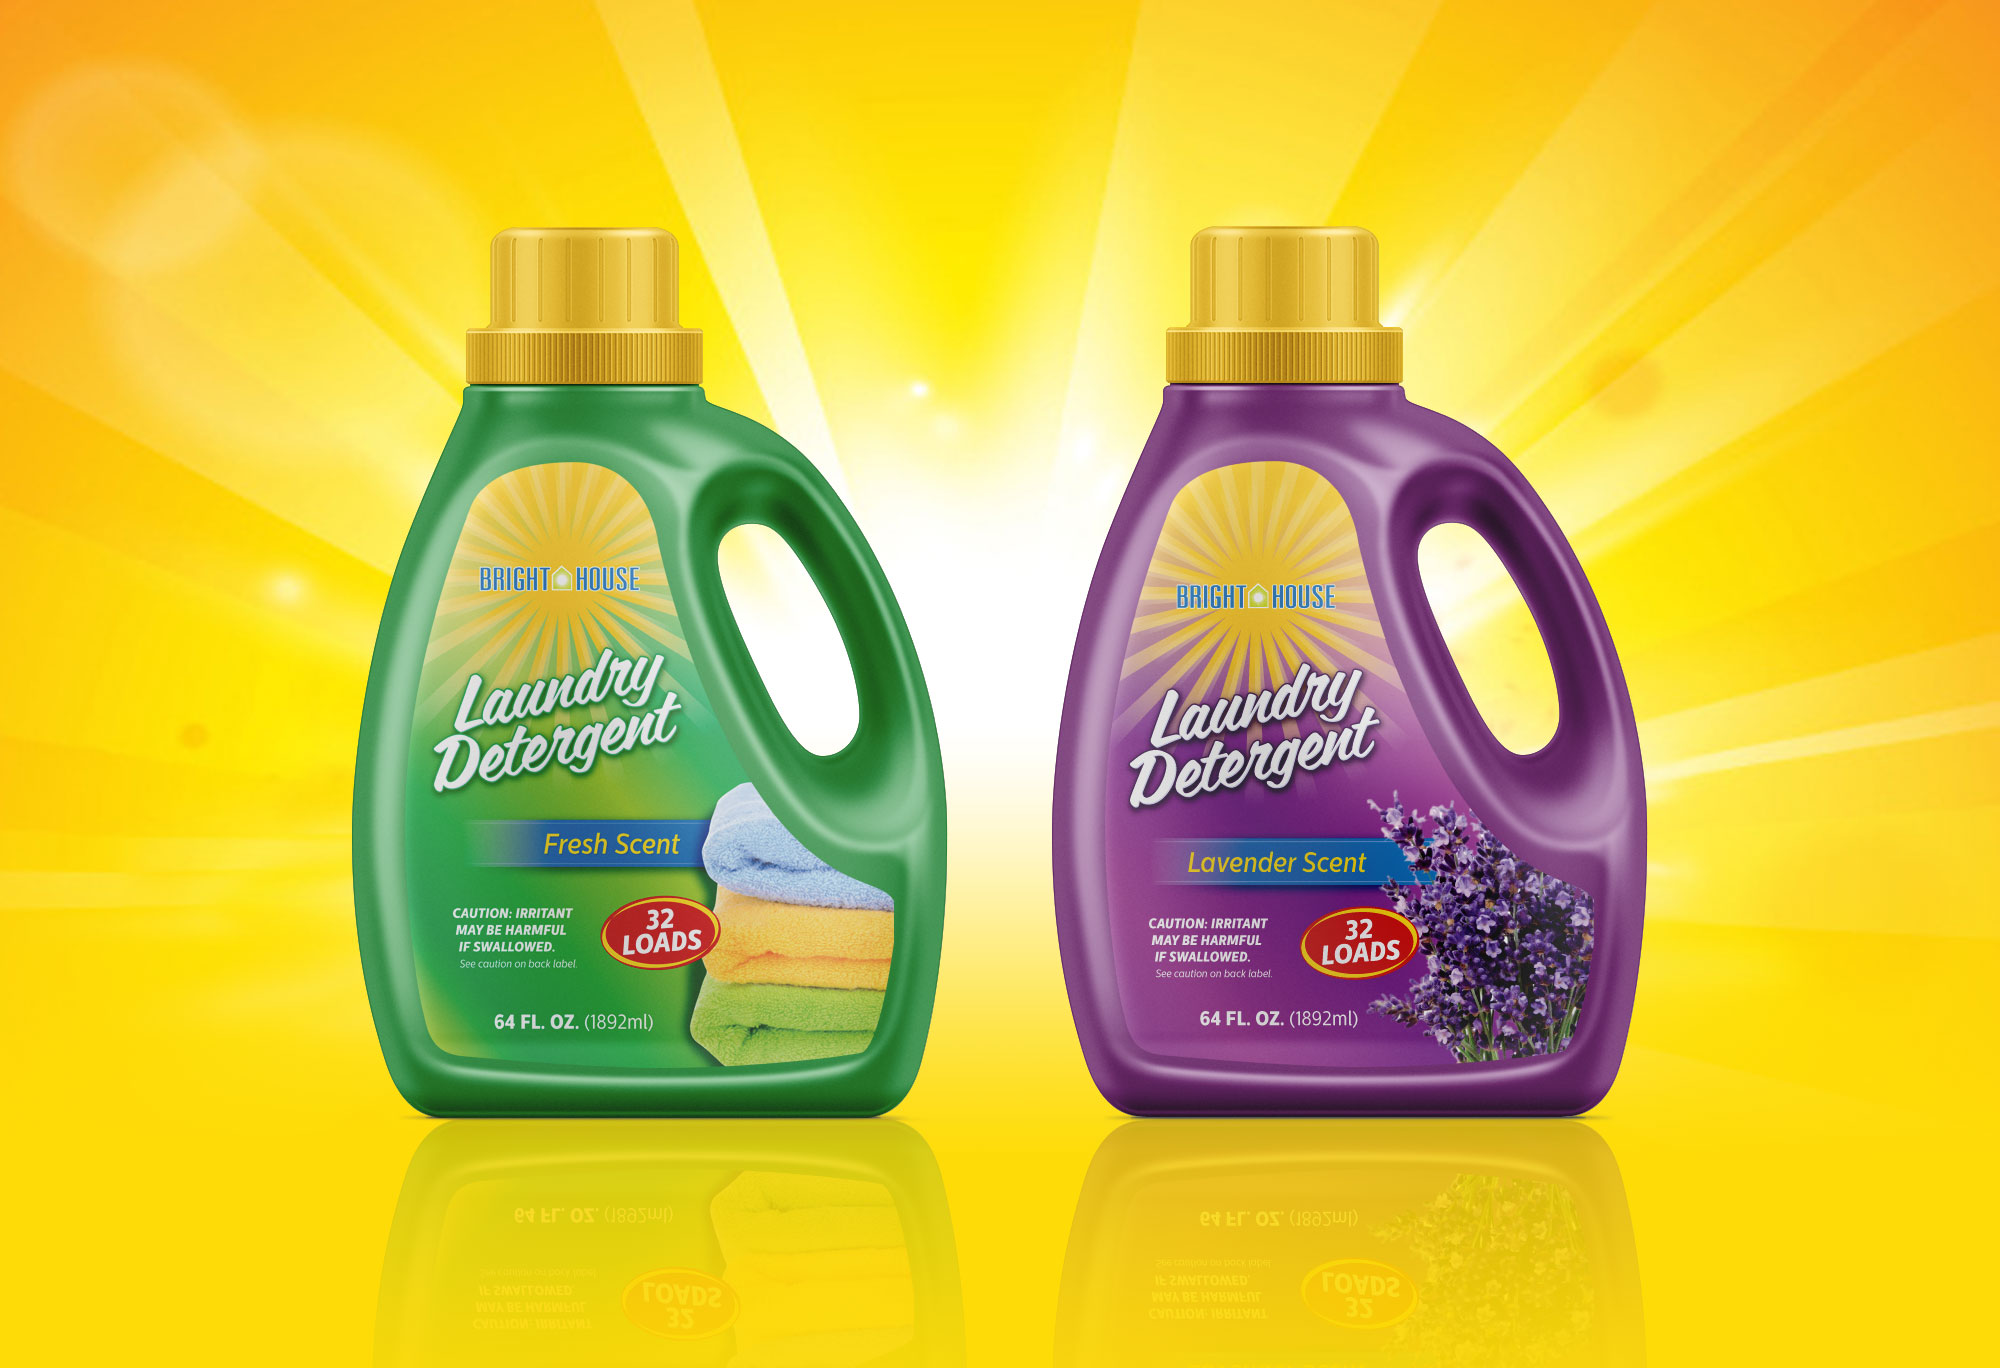 Bright House Laundry Detergent package design